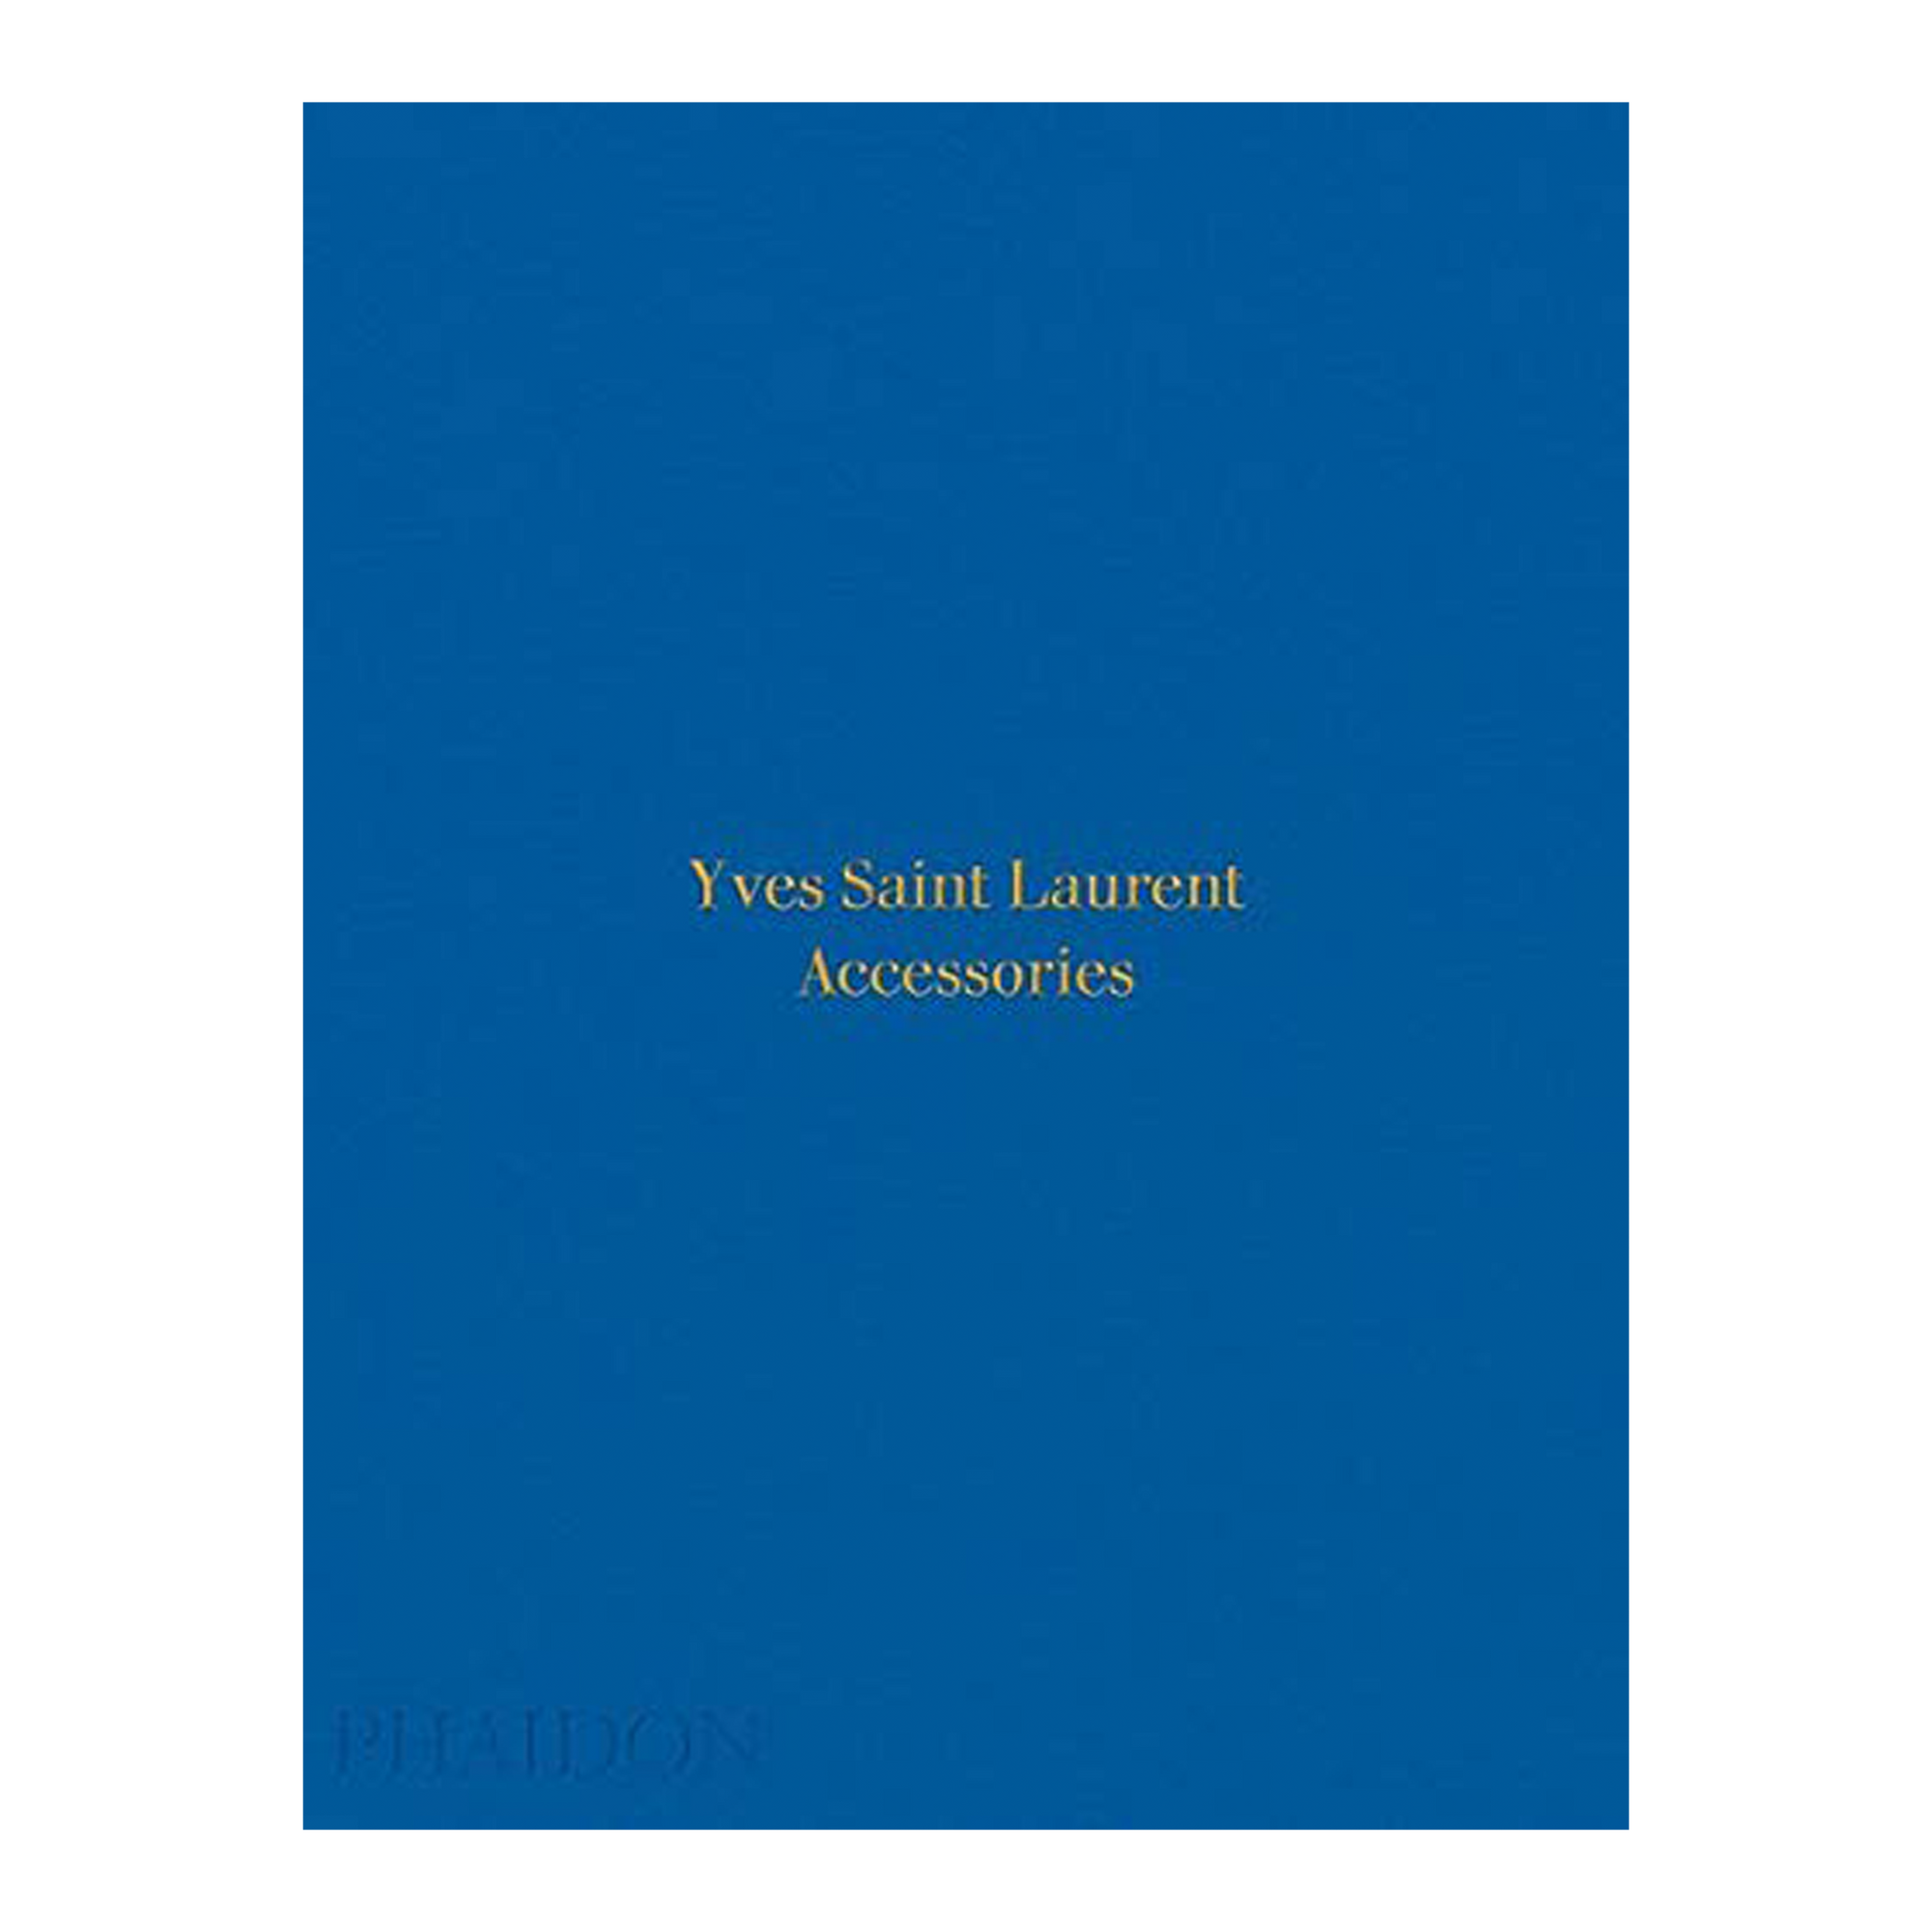 Yves Saint Laurent Accessories is the first book to date to shed light on the breathtaking accessories created by one of the most influential fashion designers of all time.